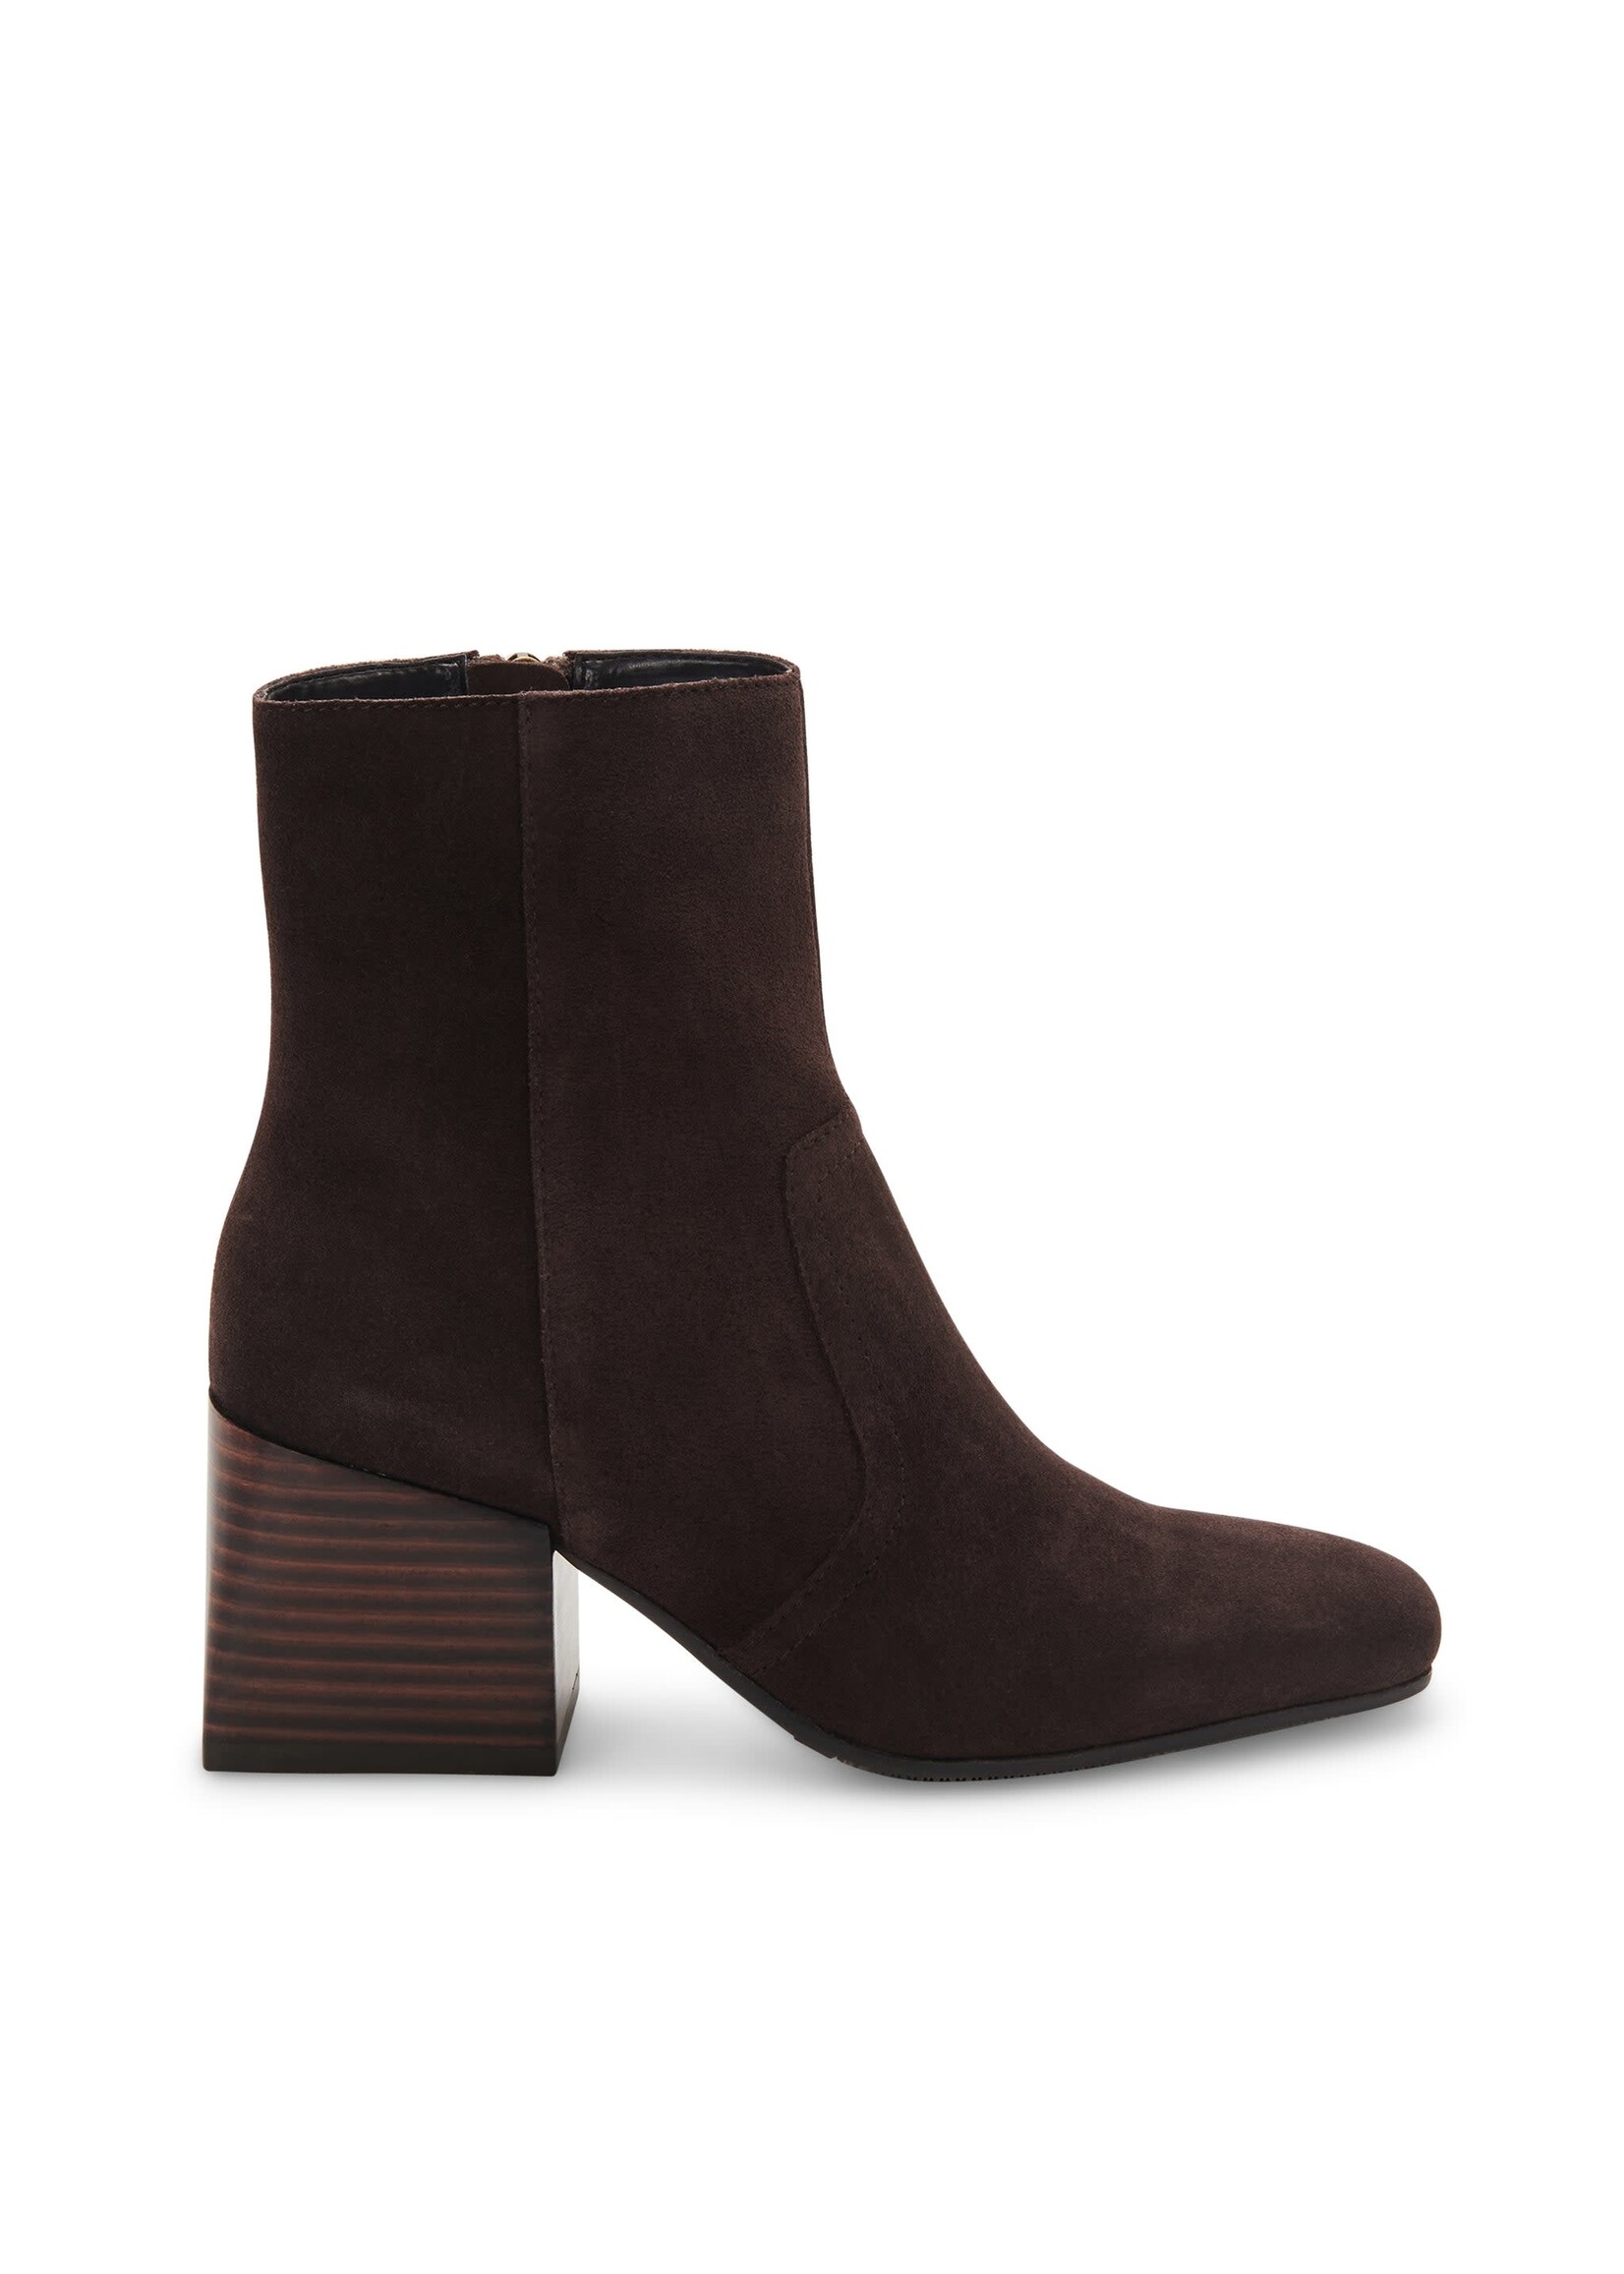 Blondo Salome Brown  Suede Boots by Blondo Final Sale